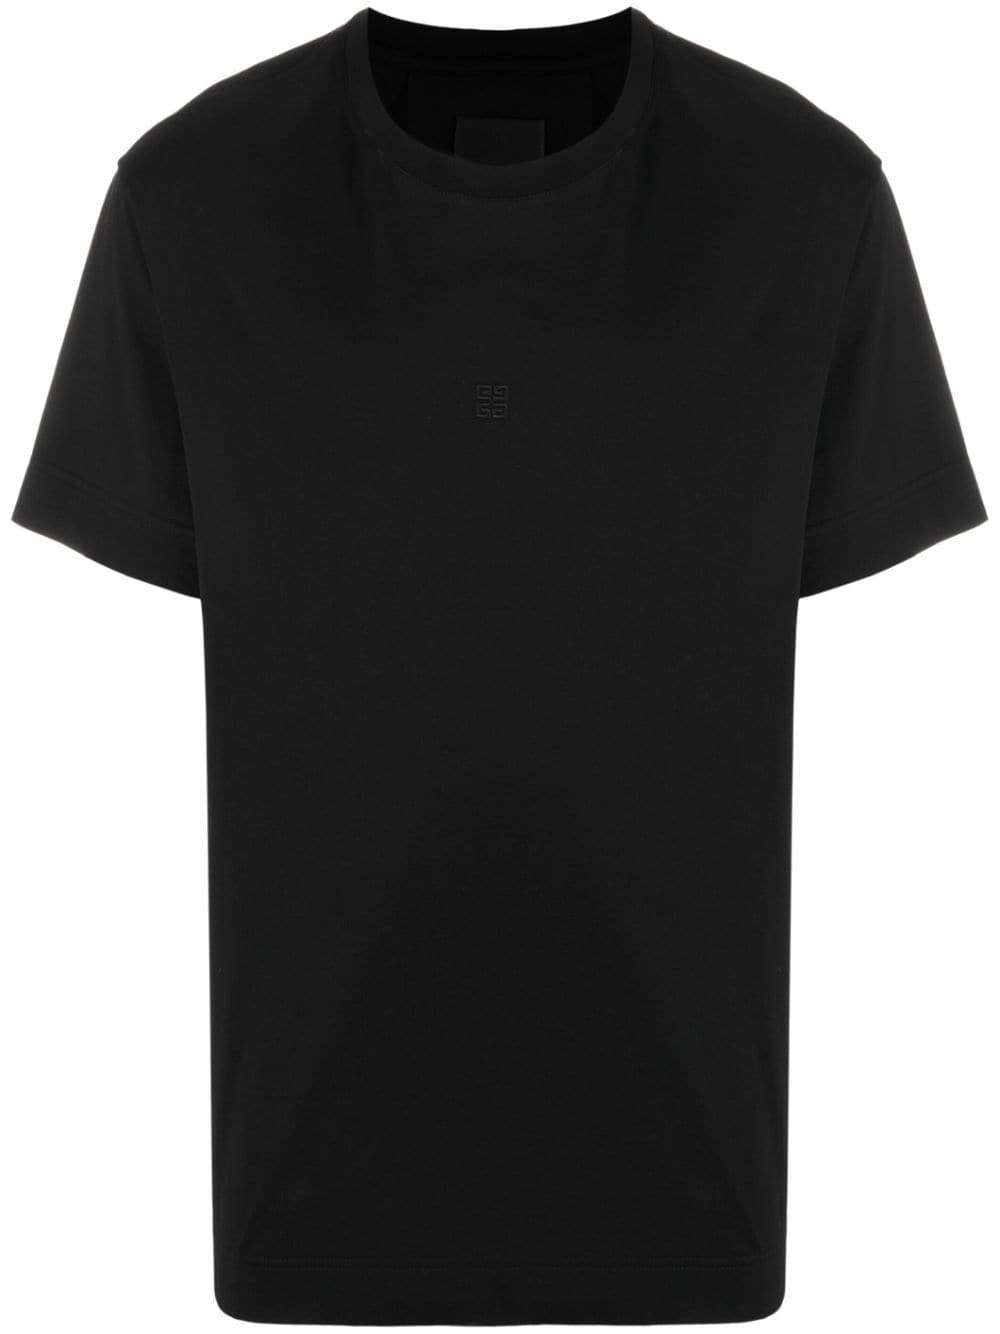 Givenchy embroidered logo cotton T-shirt - Black von Givenchy